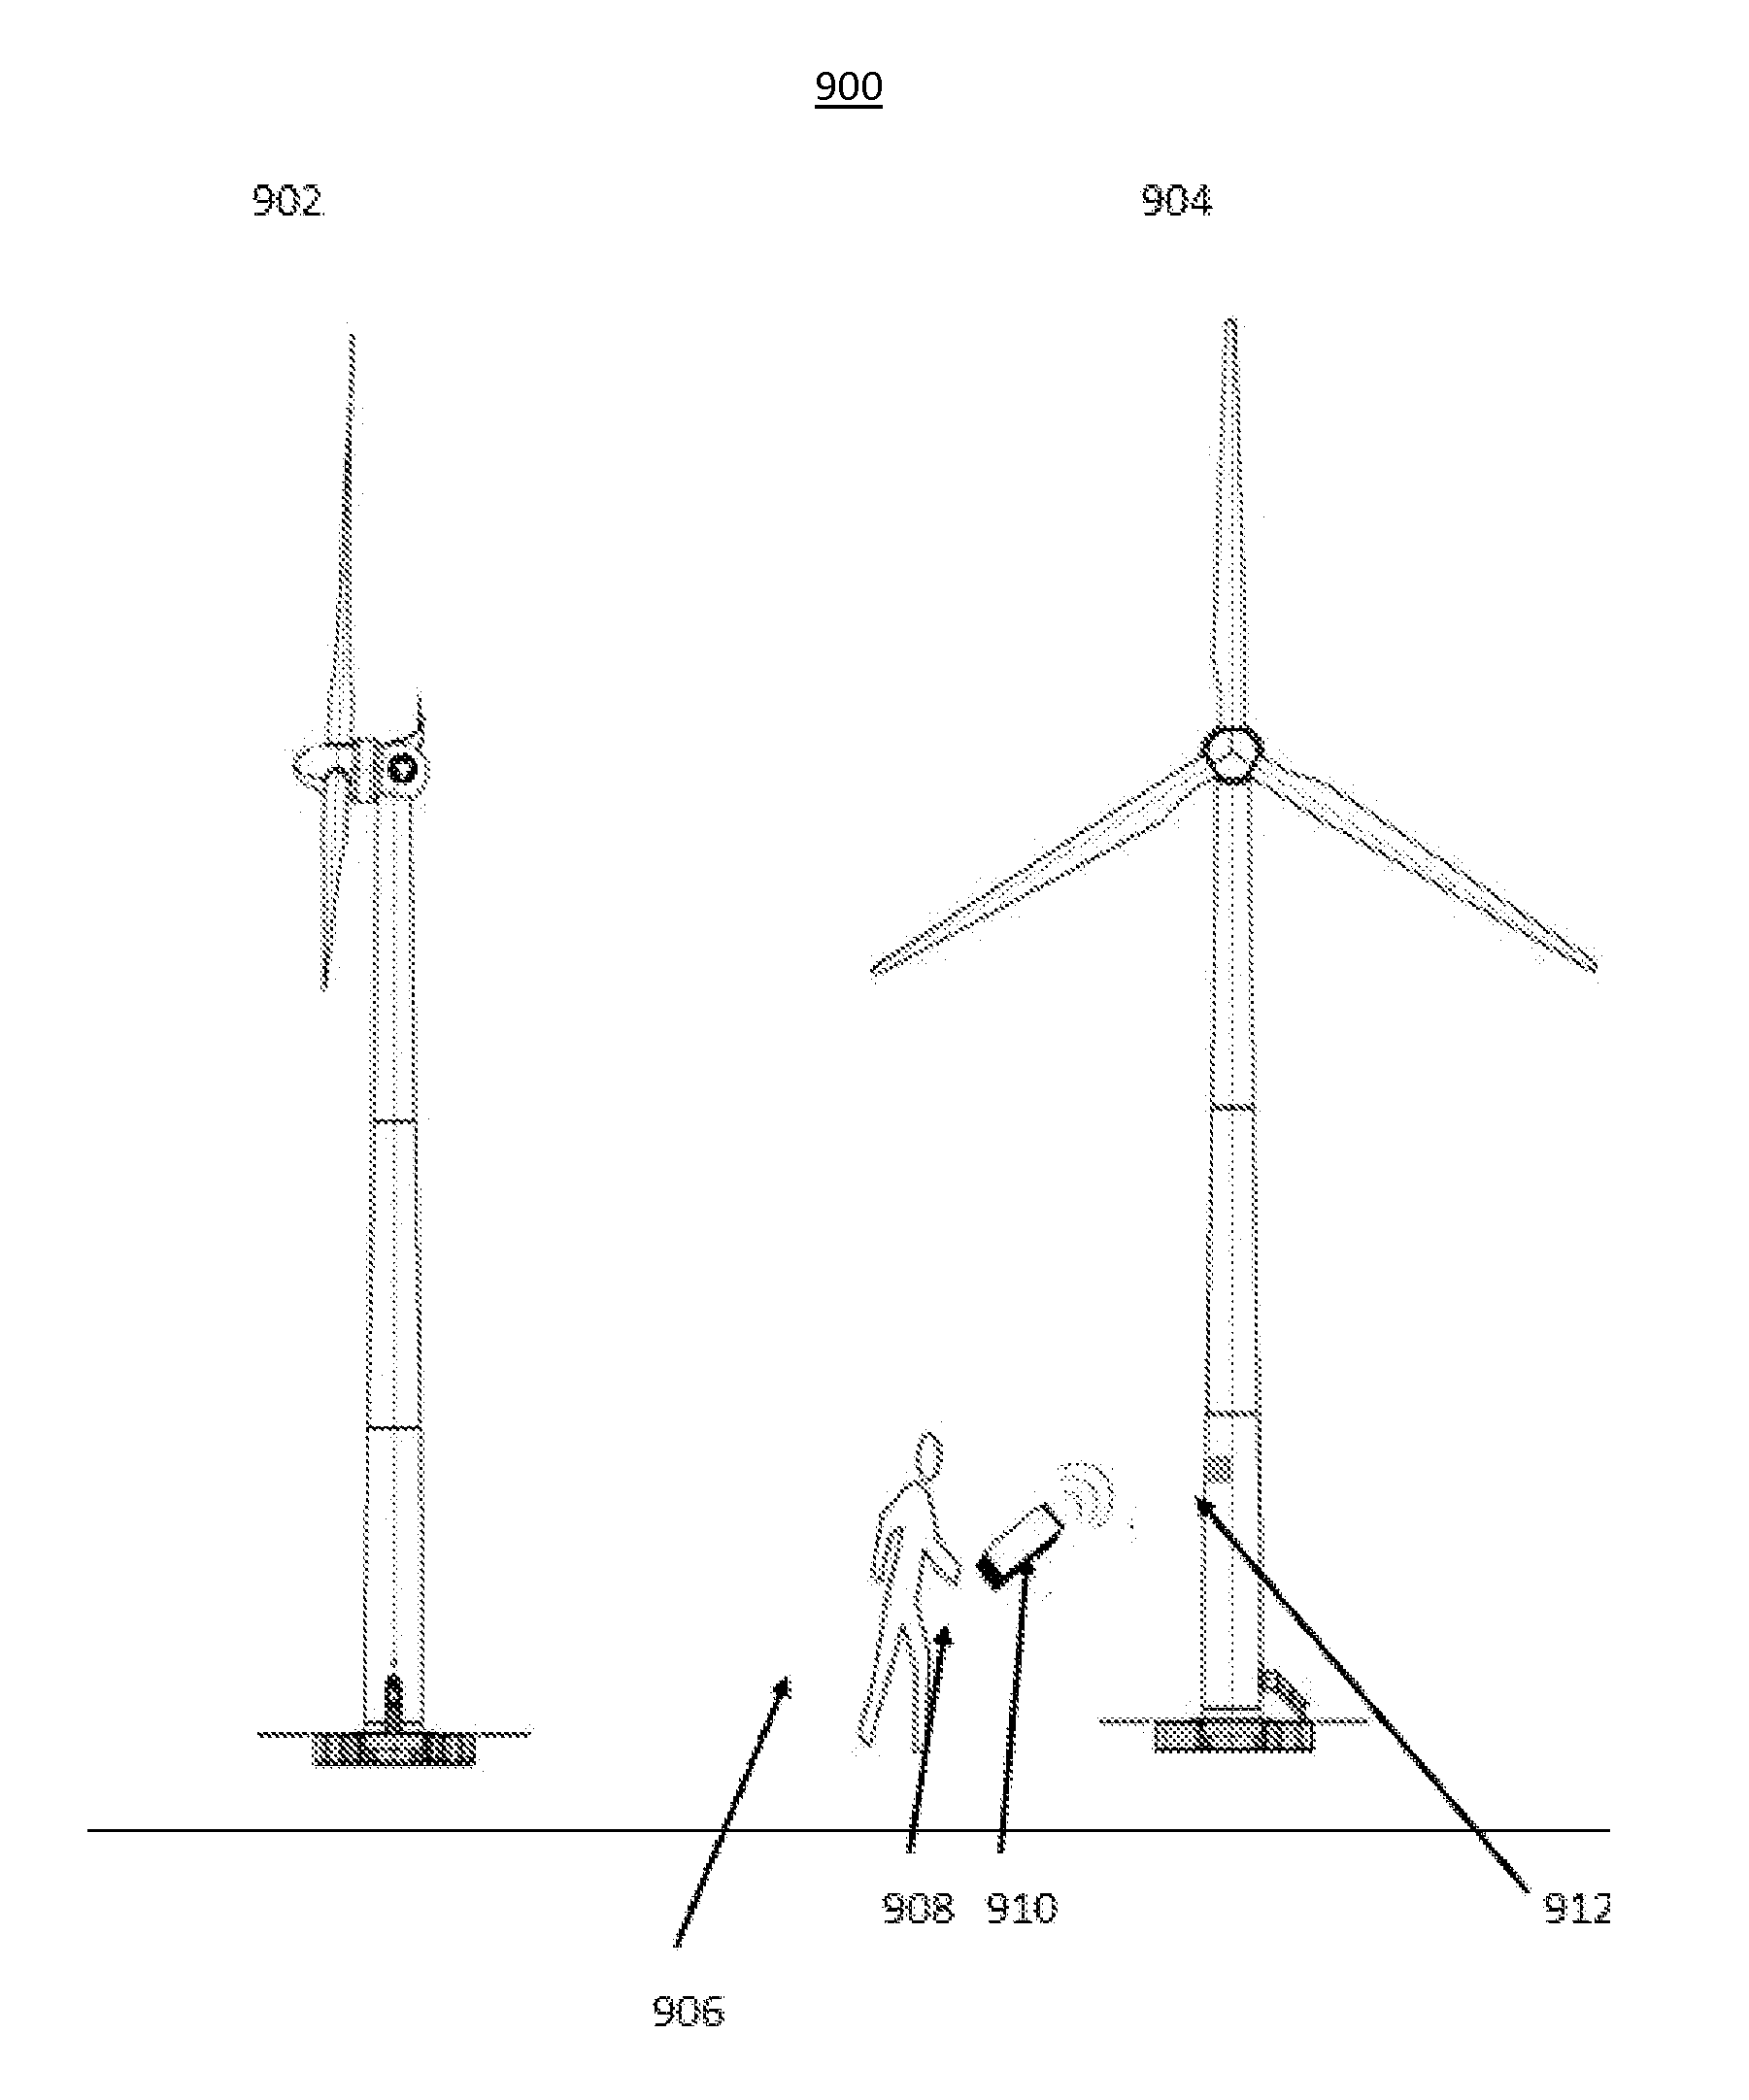 System and method for carrying out an inspection or maintenance operation with compliance tracking using a handheld device